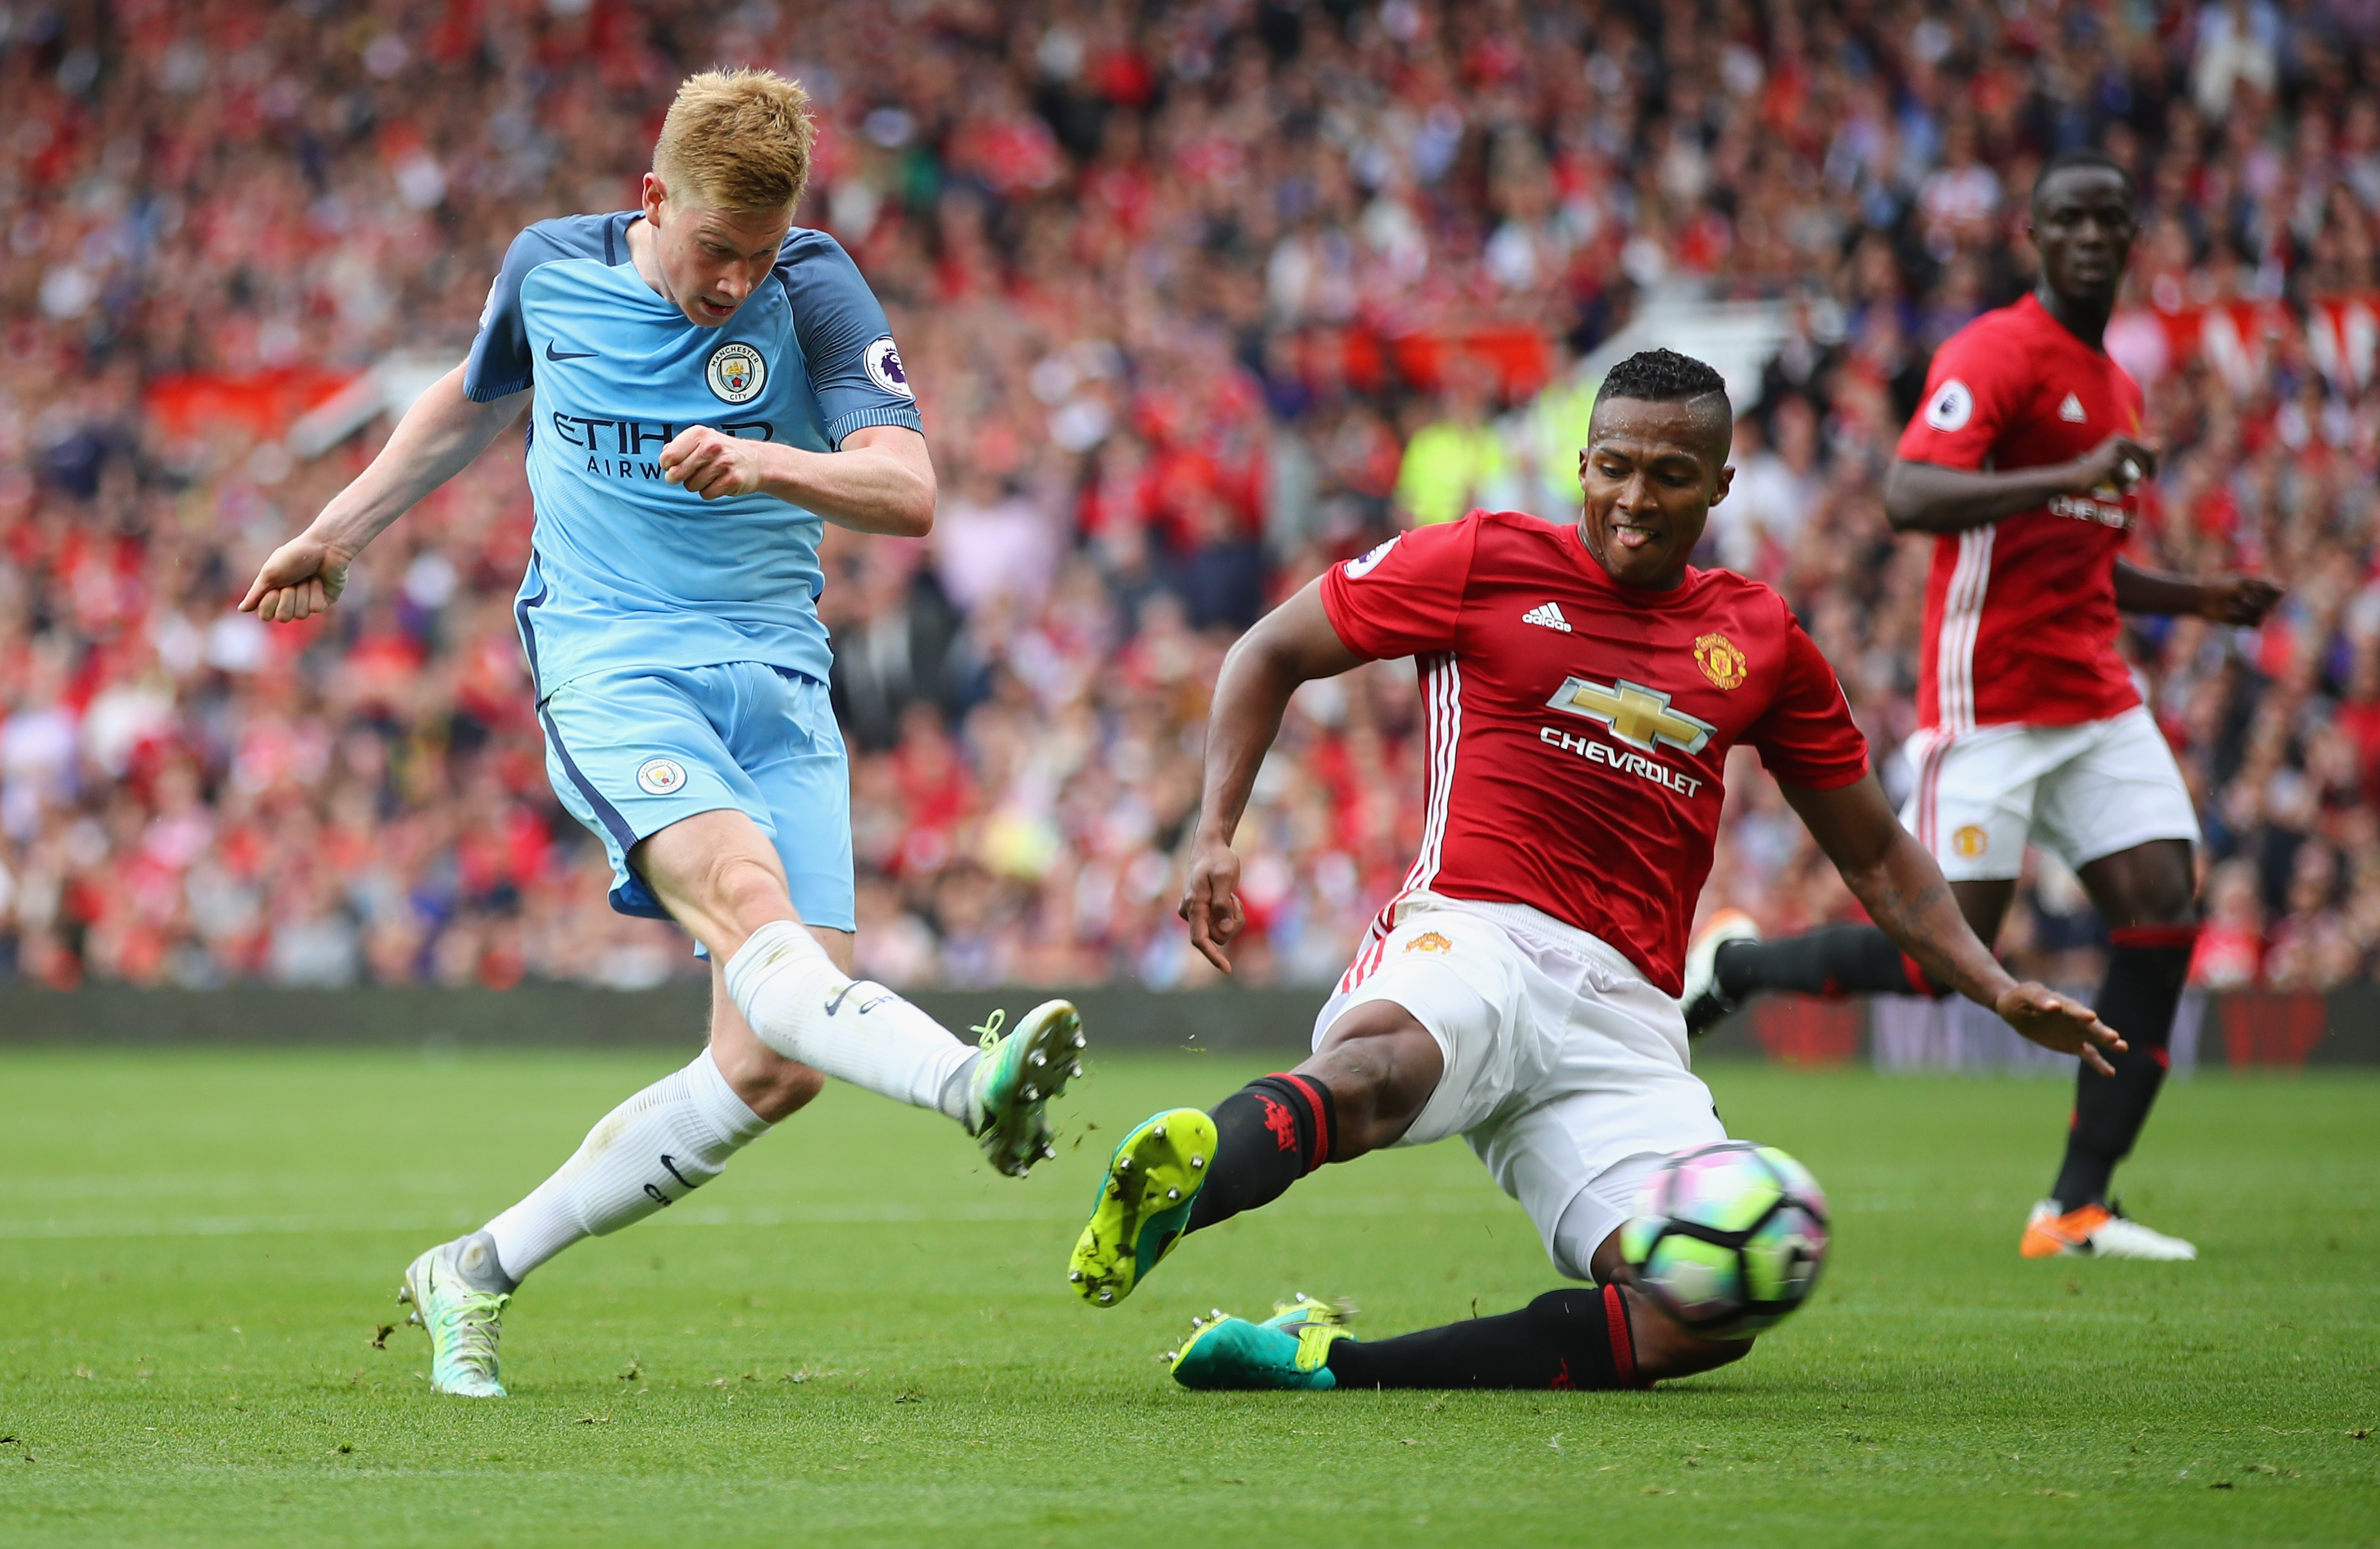 MANCHESTER, ENGLAND - SEPTEMBER 10:  Kevin De Bruyne of  Manchester City shoots past Antonio Valencia of Manchester United during the Premier League match between Manchester United and Manchester City at Old Trafford on September 10, 2016 in Manchester, England.  (Photo by Clive Brunskill/Getty Images)